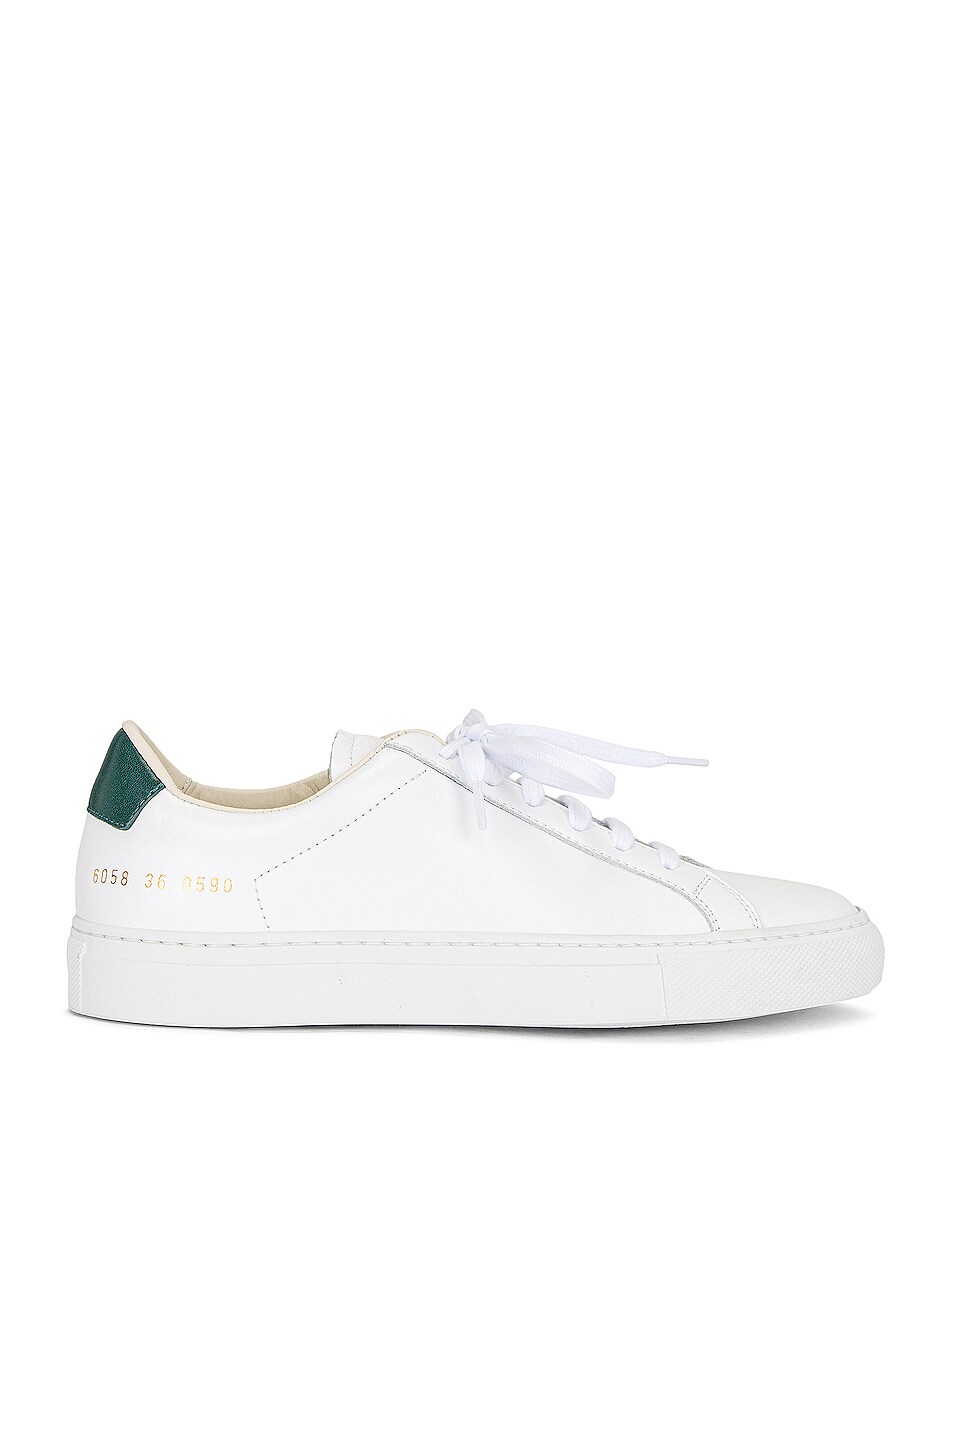 Image 1 of Common Projects Retro Low Sneaker in White & Green